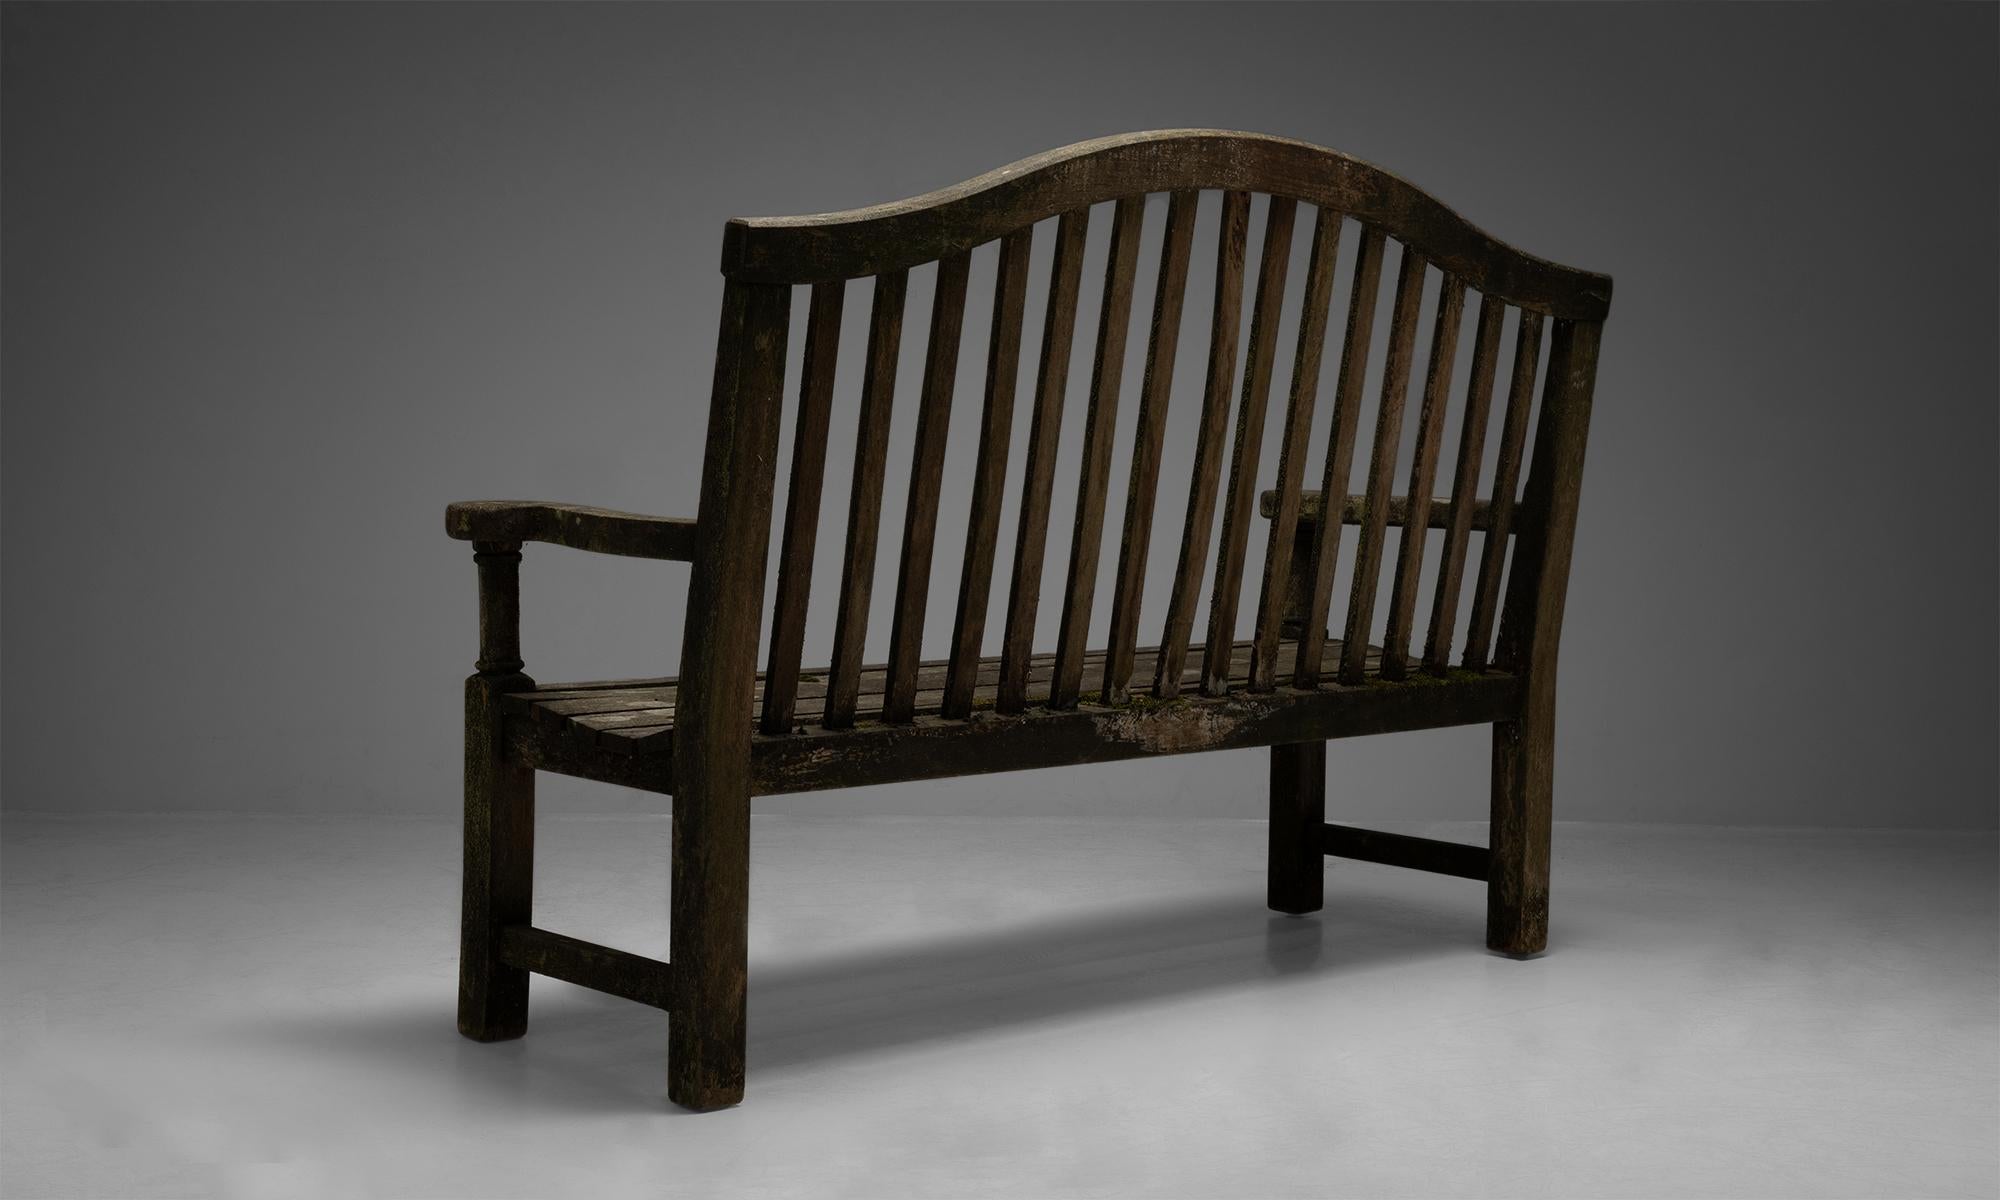 Teak garden bench

England, Circa 1970

Slatted garden bench in weathered finish with natural patina and lichen.